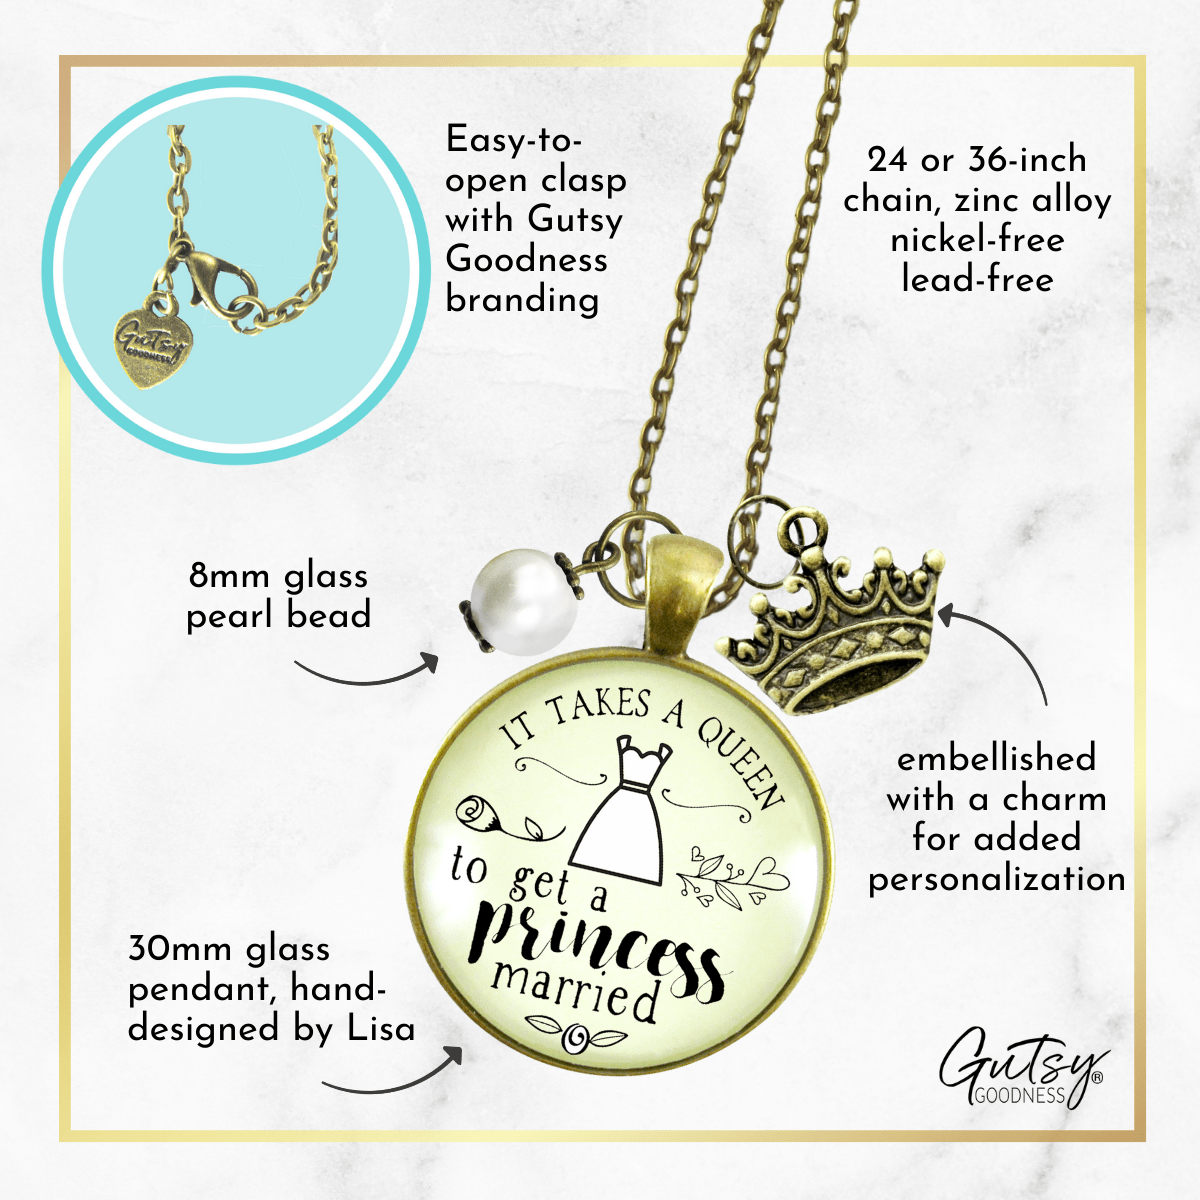 Gutsy Goodness Wedding Planner Necklace Takes Queen Bridesmaid Gift Princess Jewelry - Gutsy Goodness Handmade Jewelry;Wedding Planner Necklace Takes Queen Bridesmaid Gift Princess Jewelry - Gutsy Goodness Handmade Jewelry Gifts